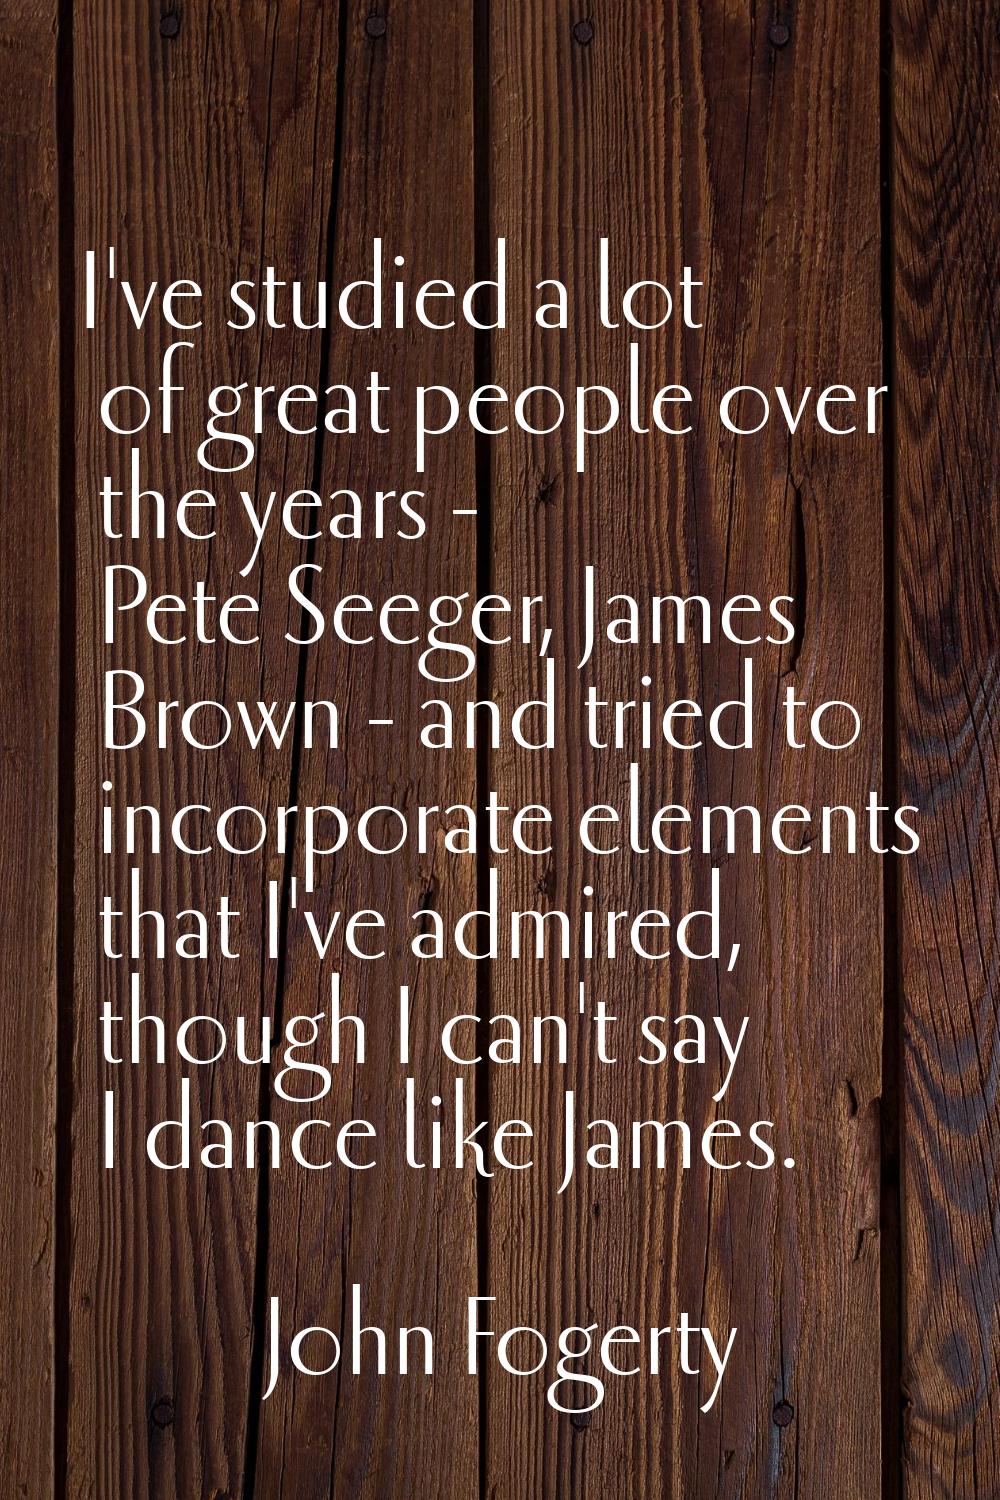 I've studied a lot of great people over the years - Pete Seeger, James Brown - and tried to incorpo